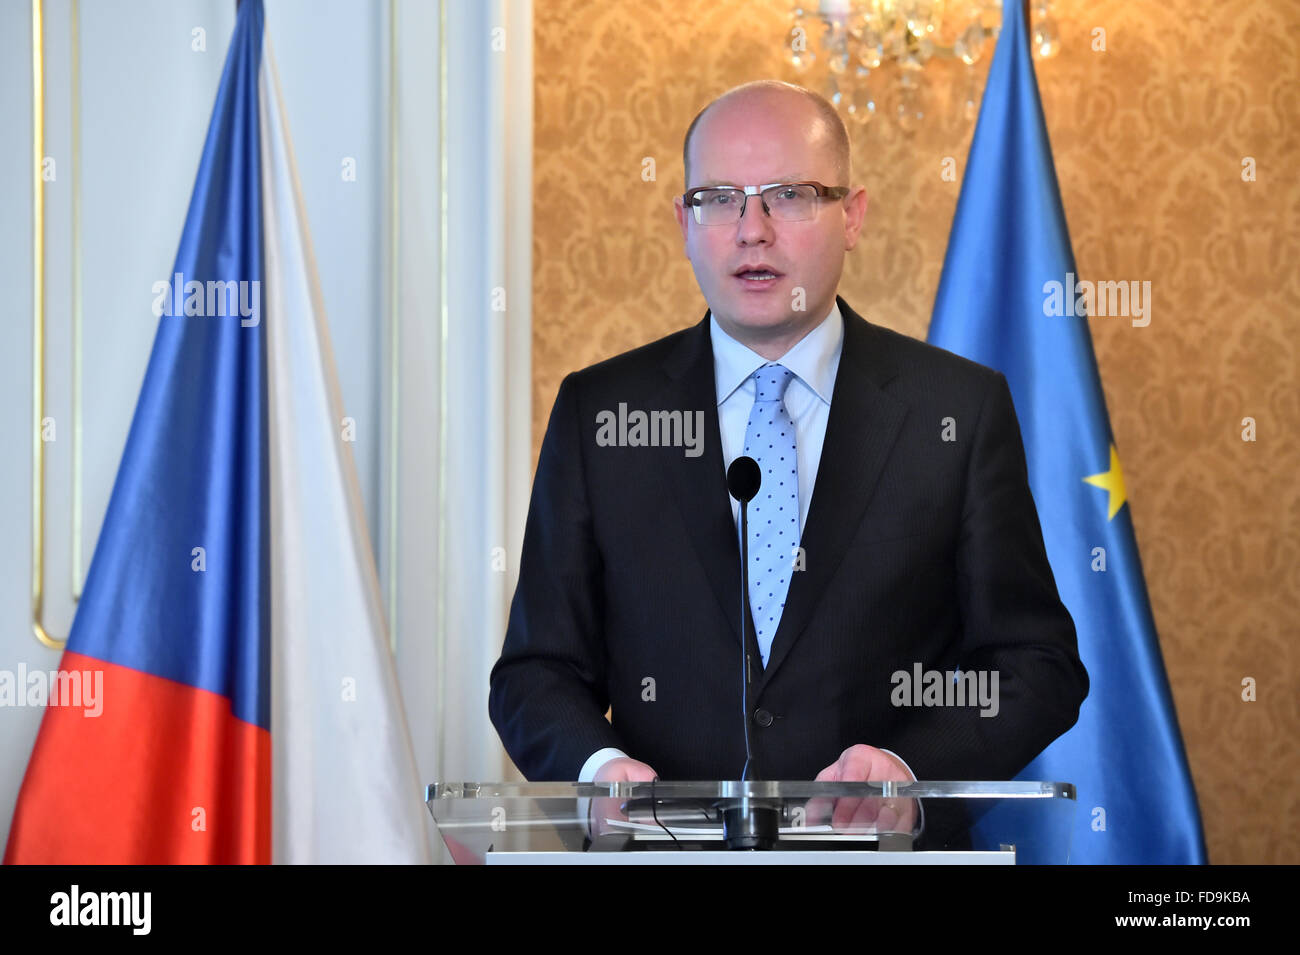 Prague, Czech Republic. 29th Jan, 2016. Conference on euro adoption in CR, contributions and risks. Czech Prime Minister Bohuslav Sobotka speaks during the Conference in Prague, Czech Republic, January 29, 2016. © Vit Simanek/CTK Photo/Alamy Live News Stock Photo